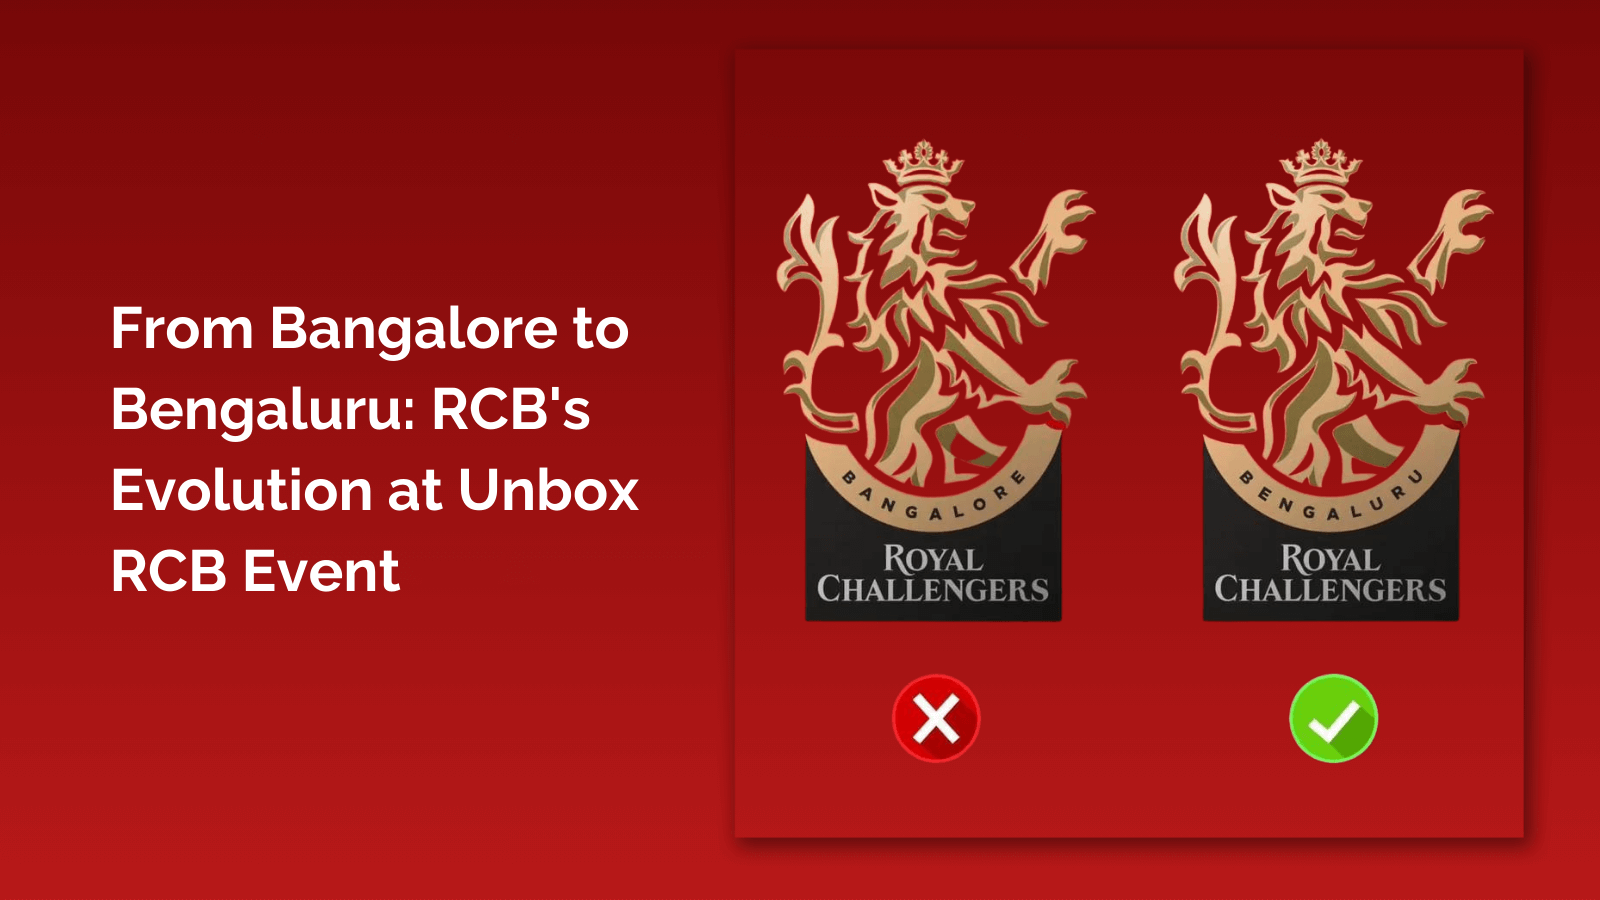 From Bangalore to Bengaluru RCB's Evolution at Unbox RCB Event